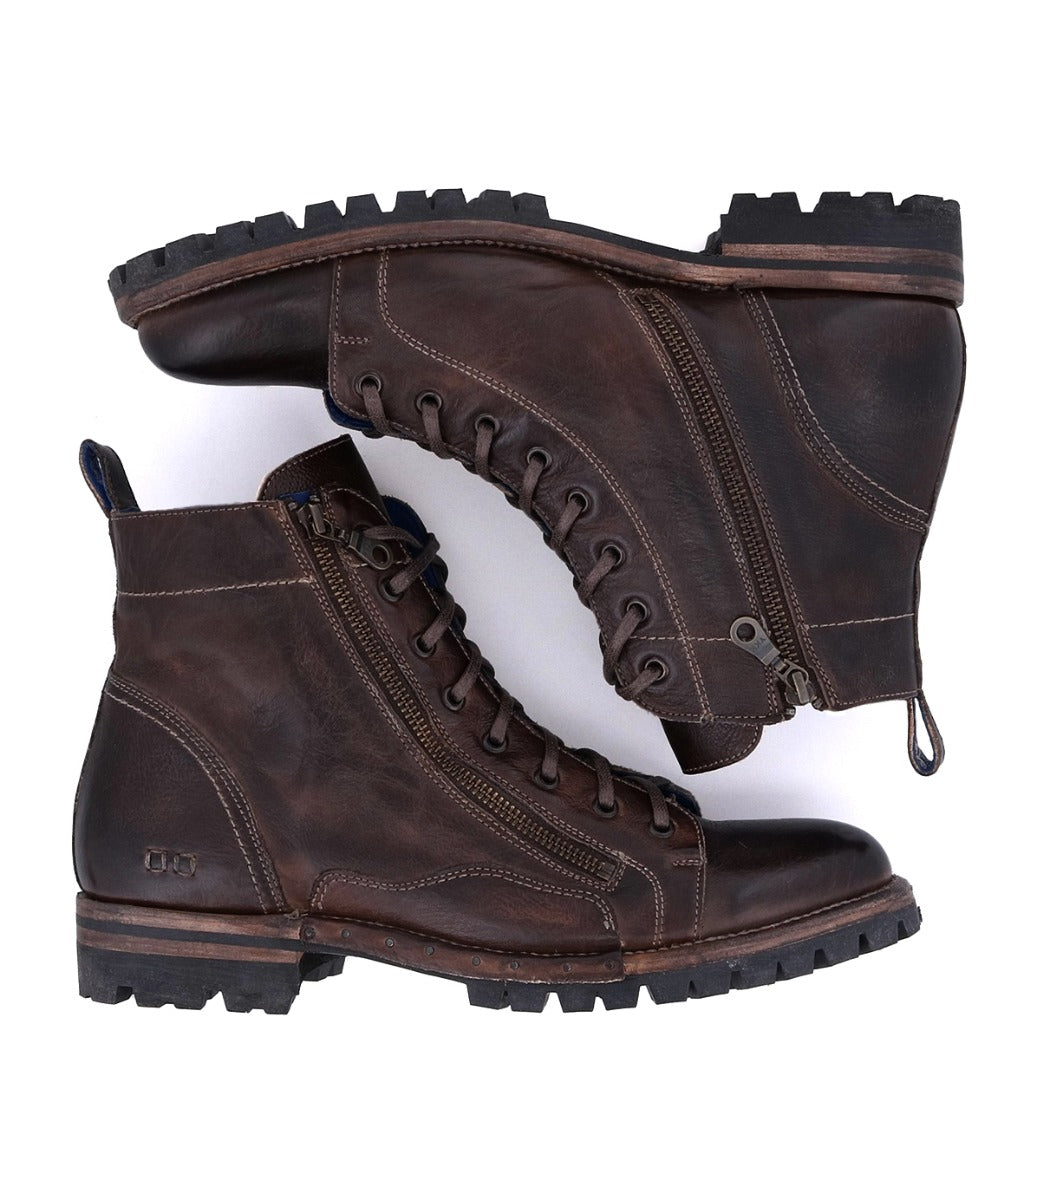 A pair of men's Bed Stu Old Bowen Trek brown leather boots.